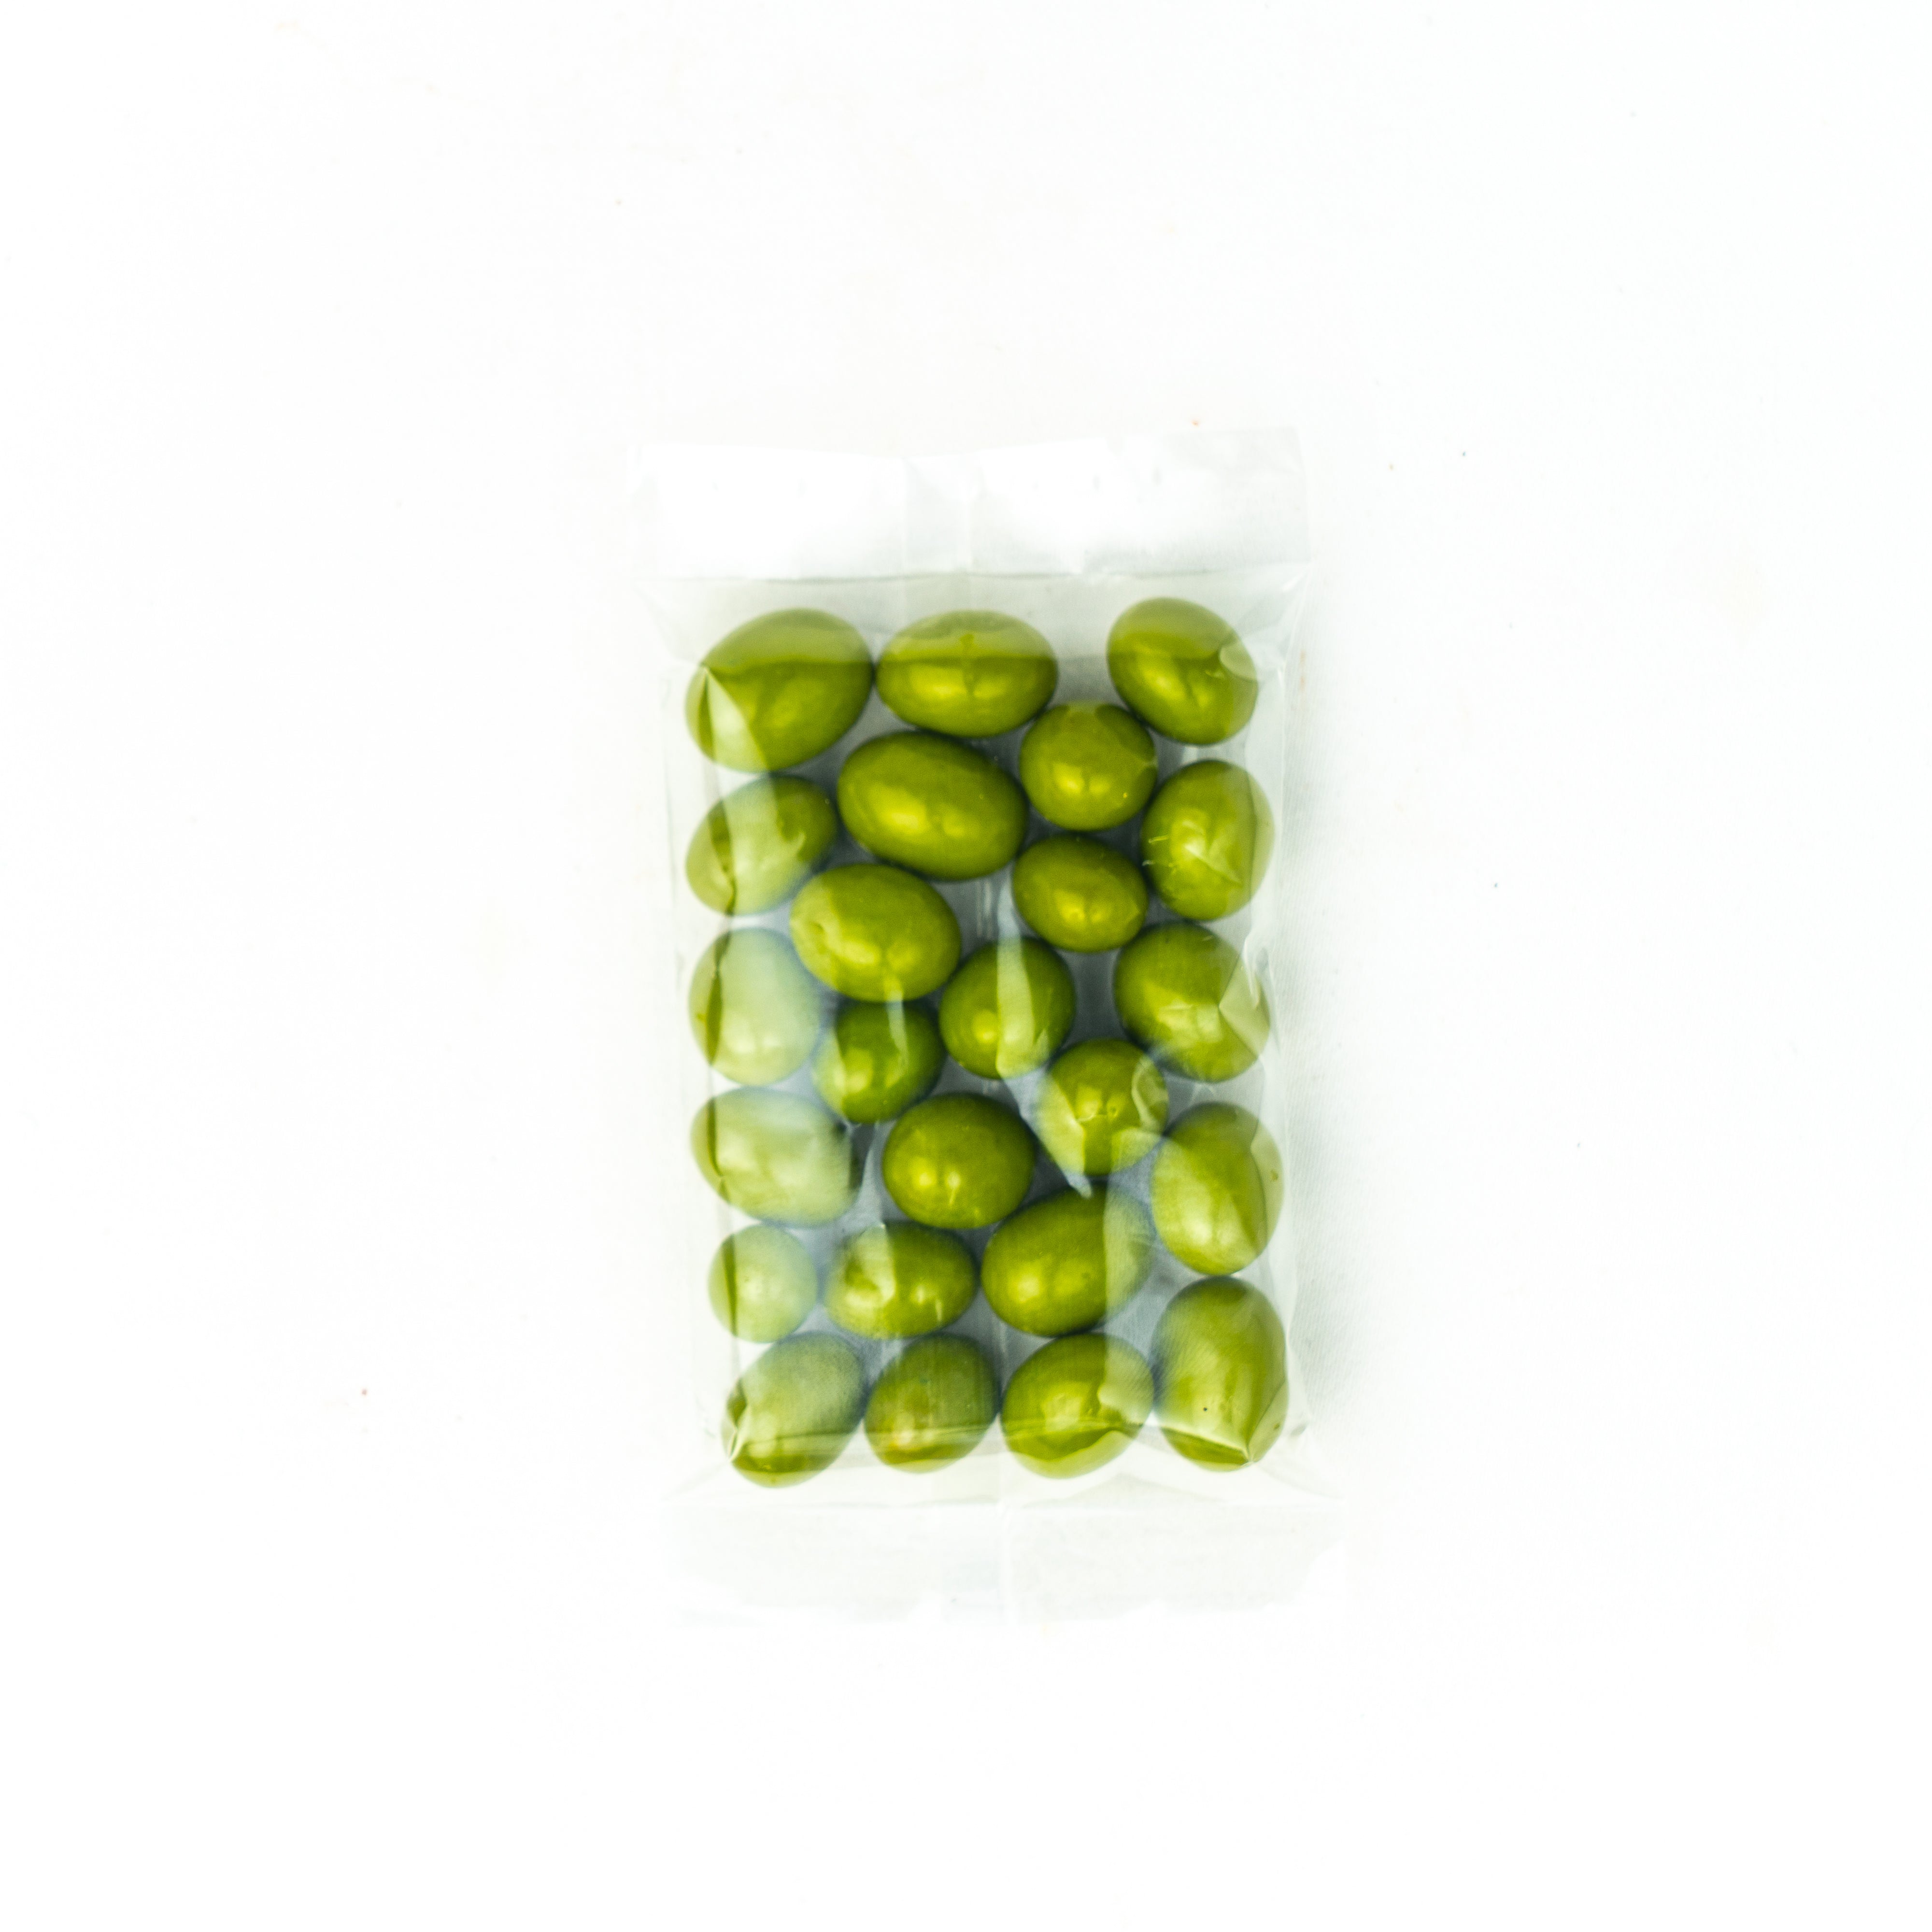 Entisi - Chocolate coated Salted Pistachio Dragees